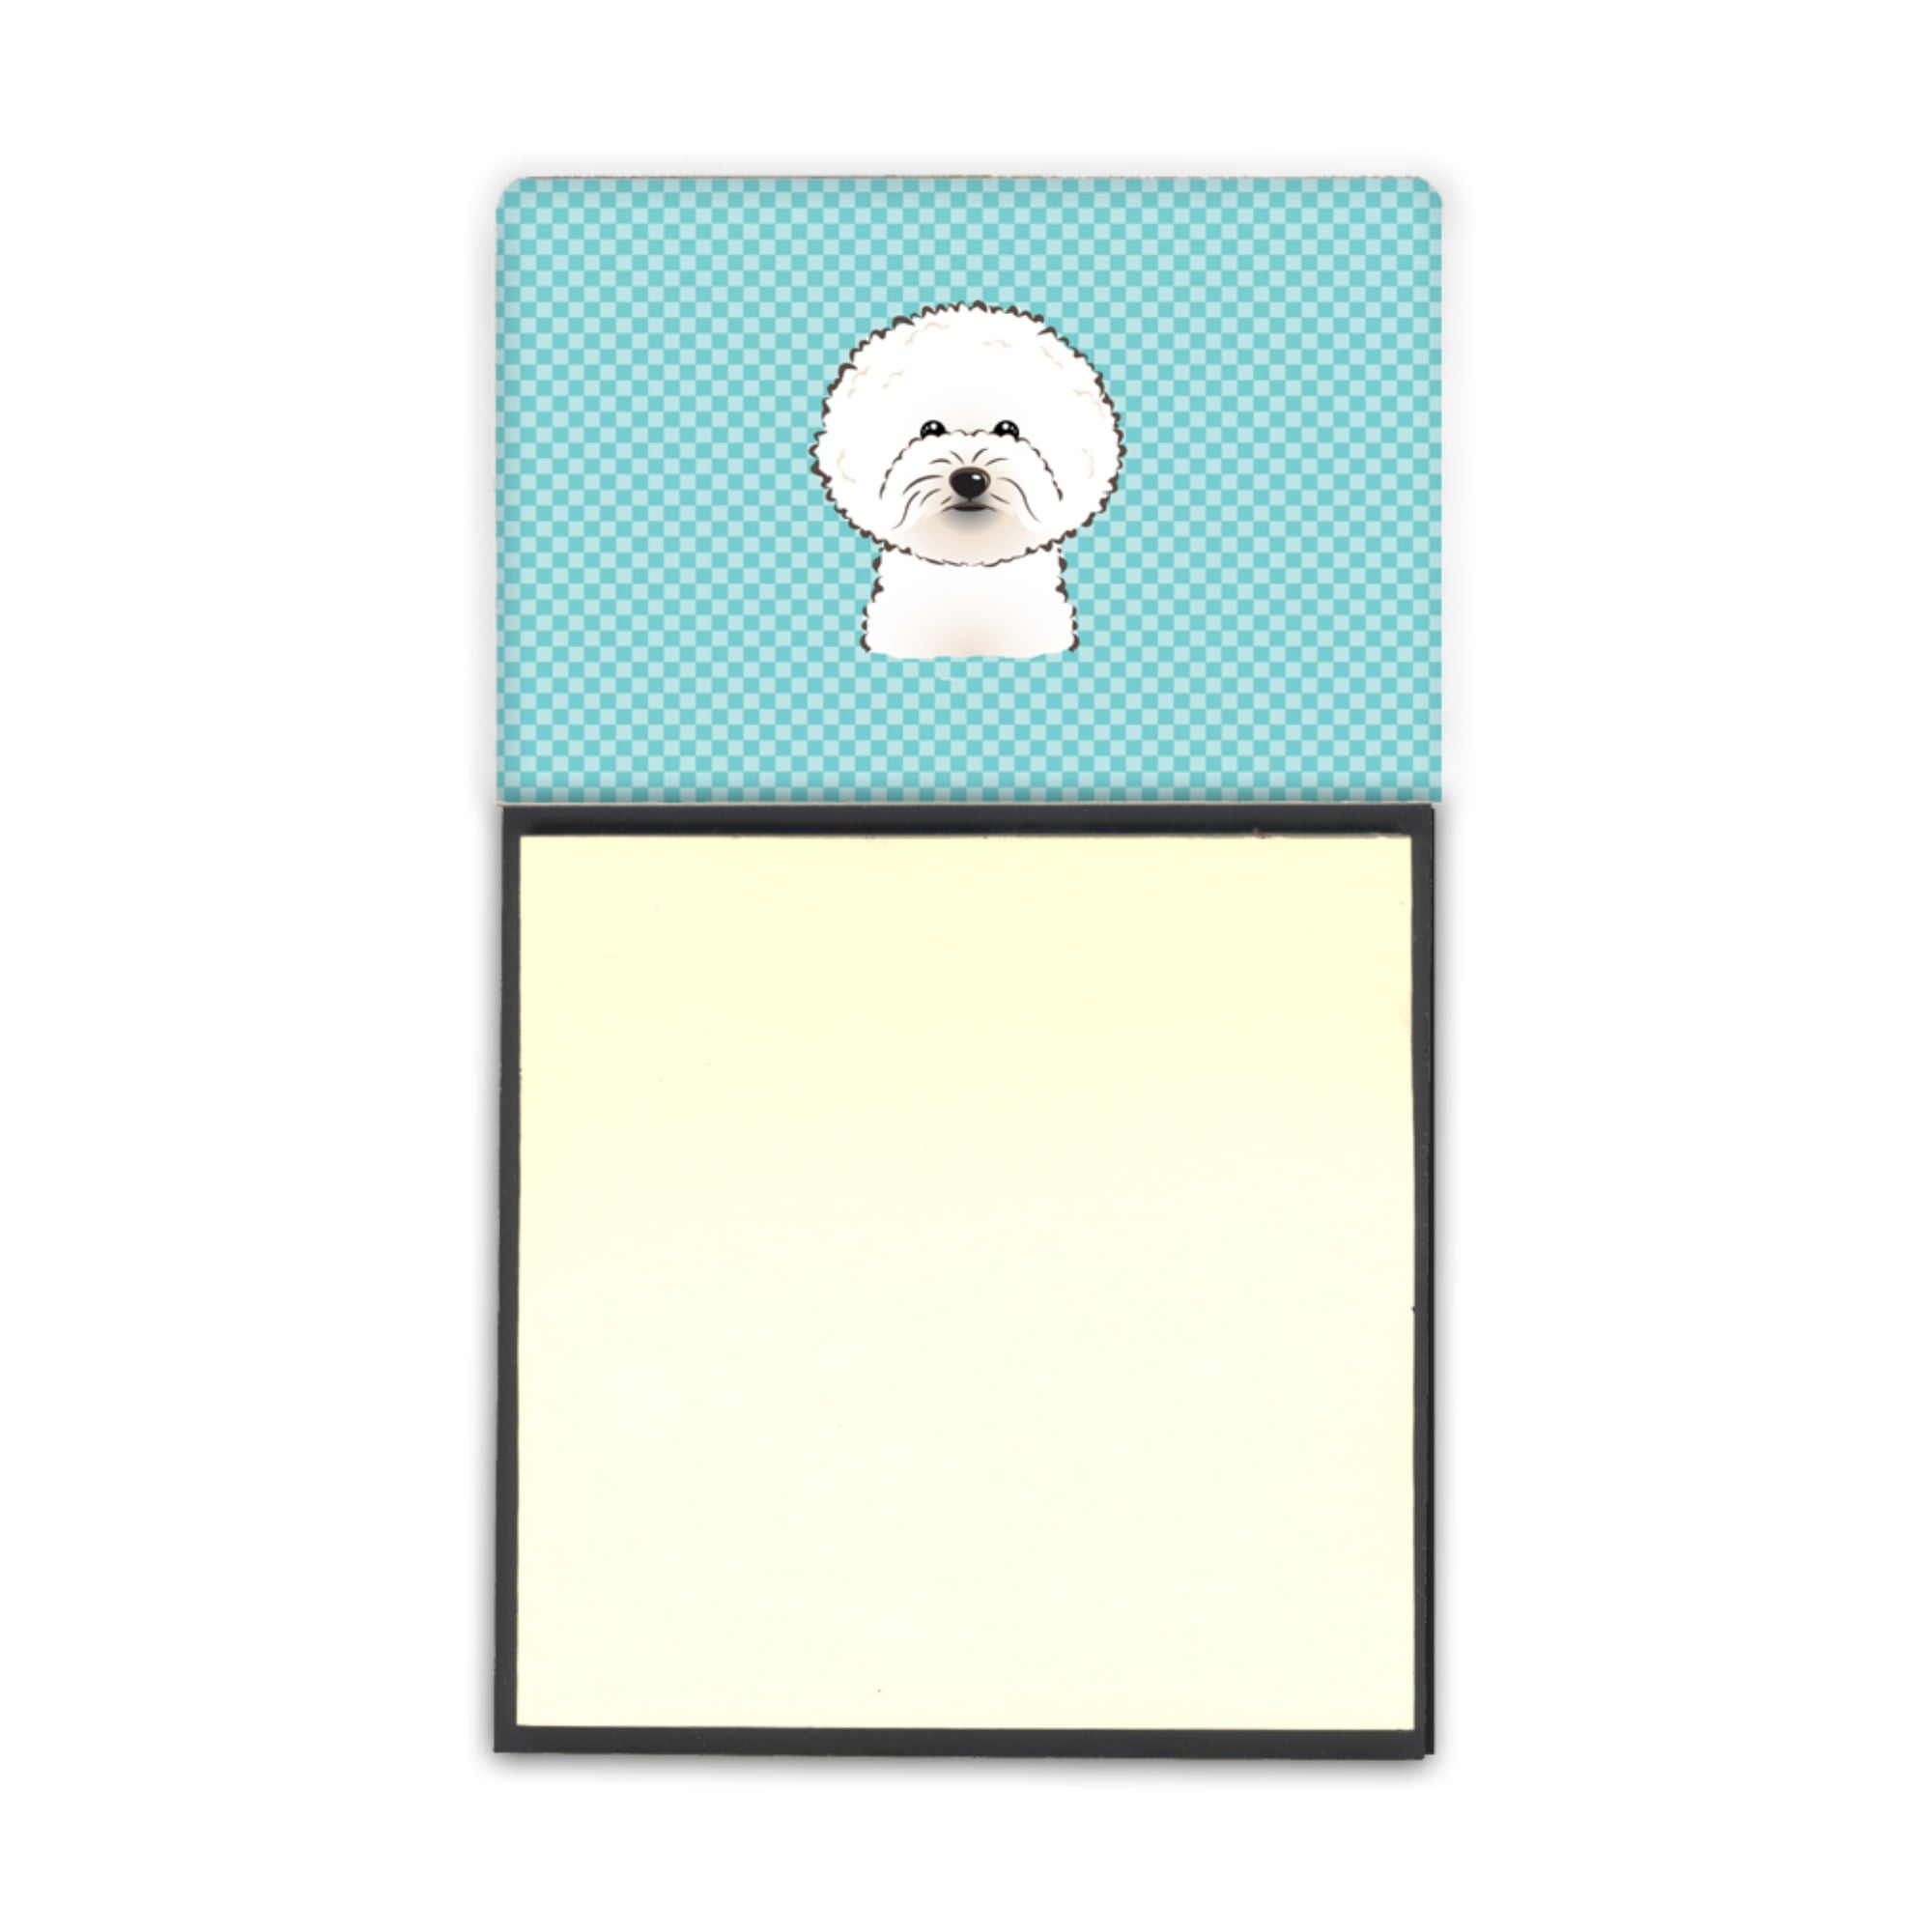 3.25 by 5.5 Multicolor Carolines Treasures Checkerboard Blue Bichon Frise Refillable Sticky Note Holder or Postit Note Dispenser 